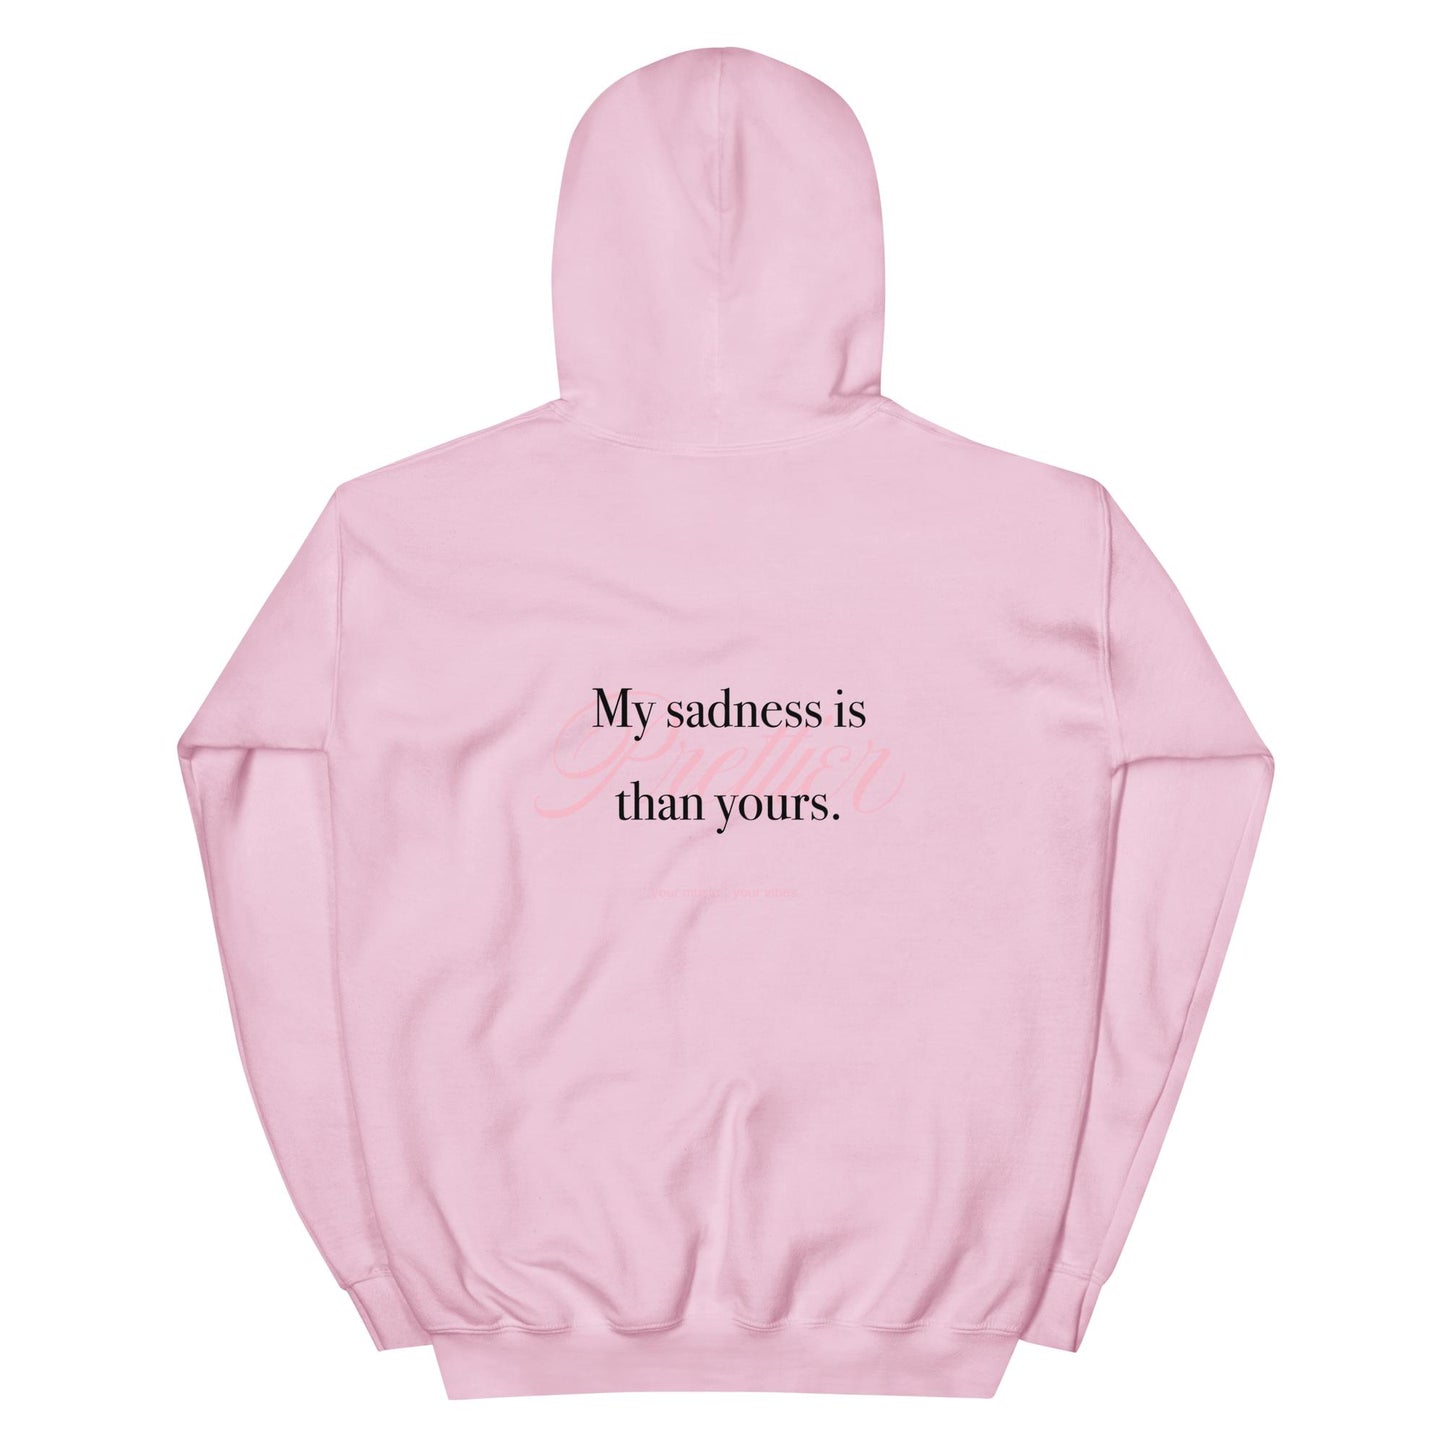 "my sadness is prettier than yours" | limited edition unisex hoodie